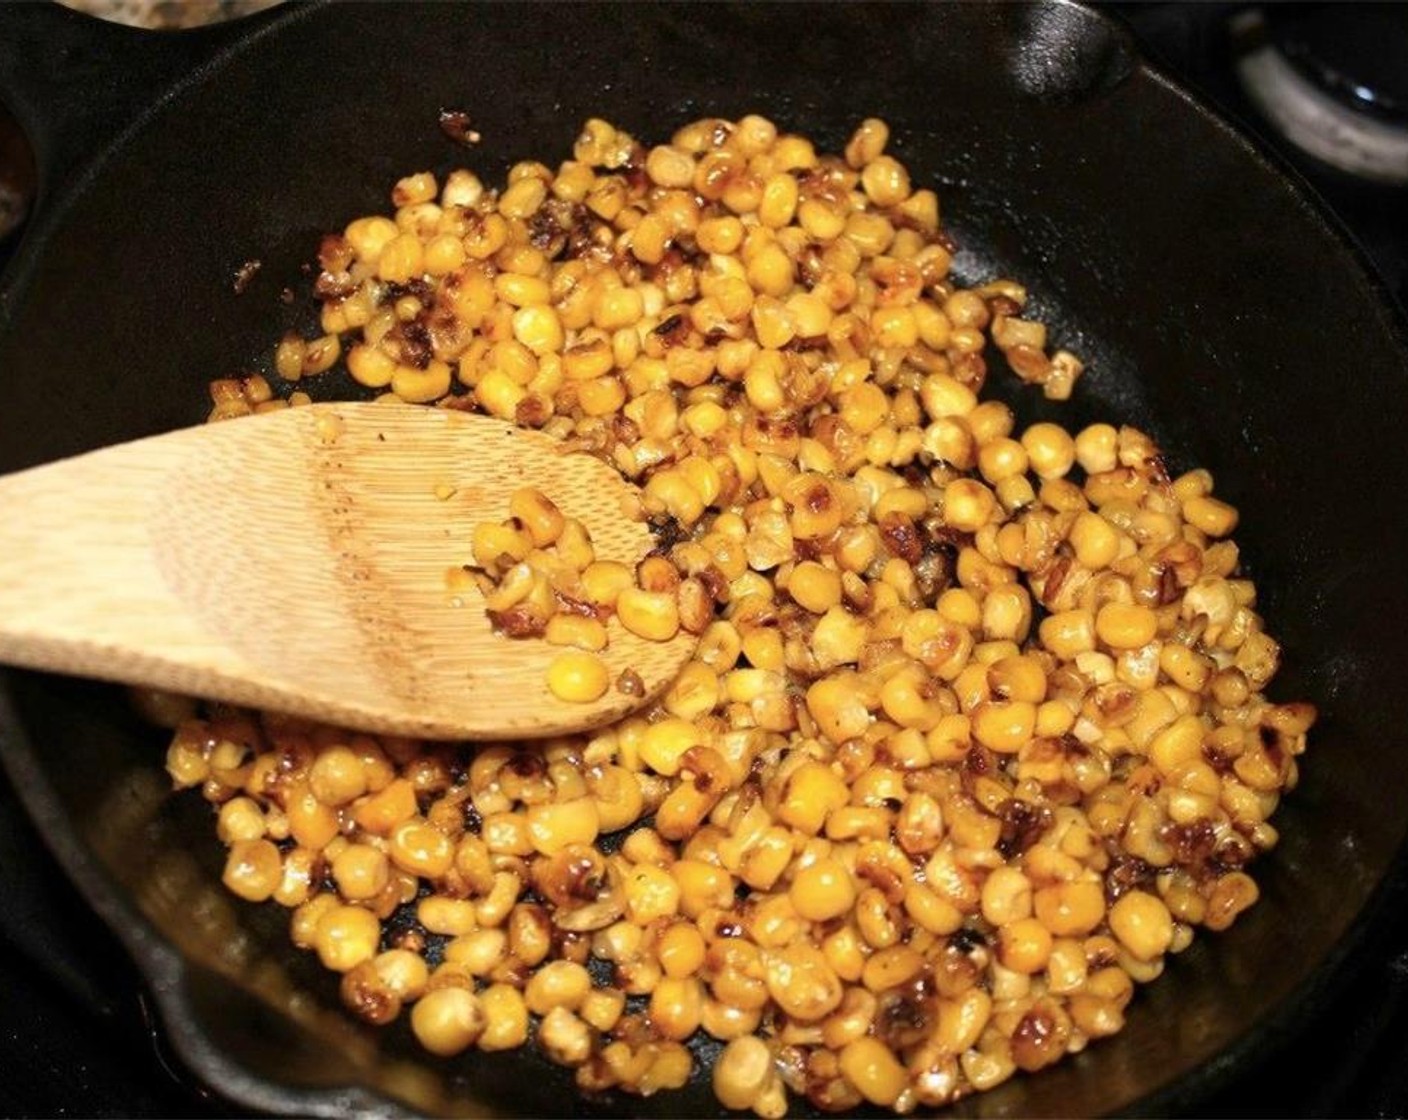 step 2 Heat Canola Oil (1/4 cup) in a cast-iron skillet. When it is very hot, add the drained Whole Kernel Corn (2 cans). It will start to pop.